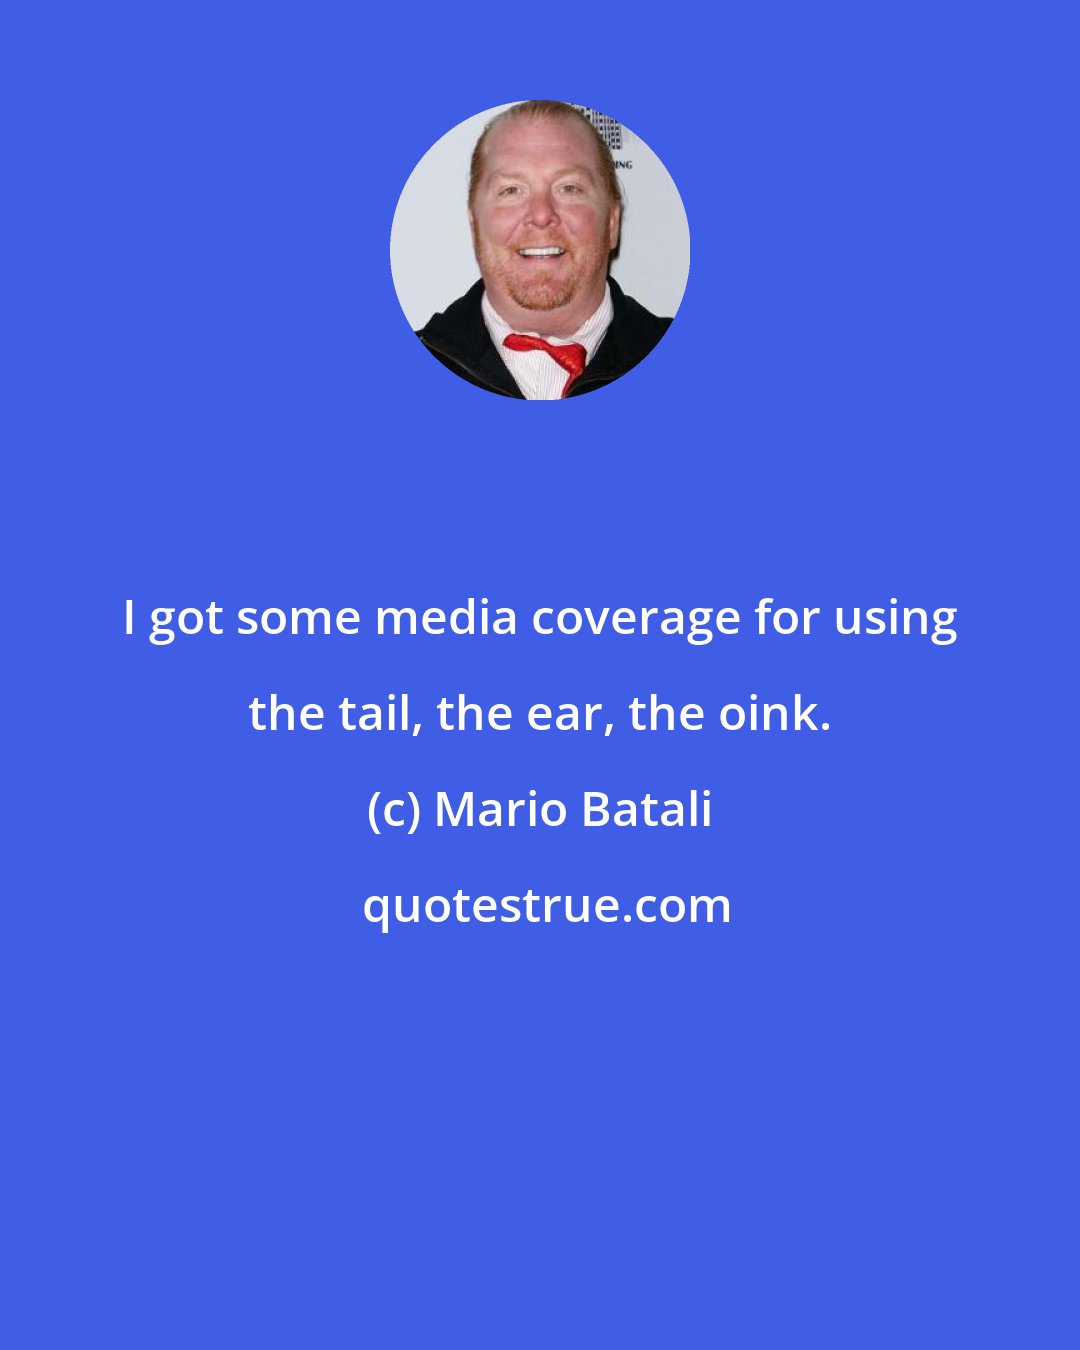 Mario Batali: I got some media coverage for using the tail, the ear, the oink.